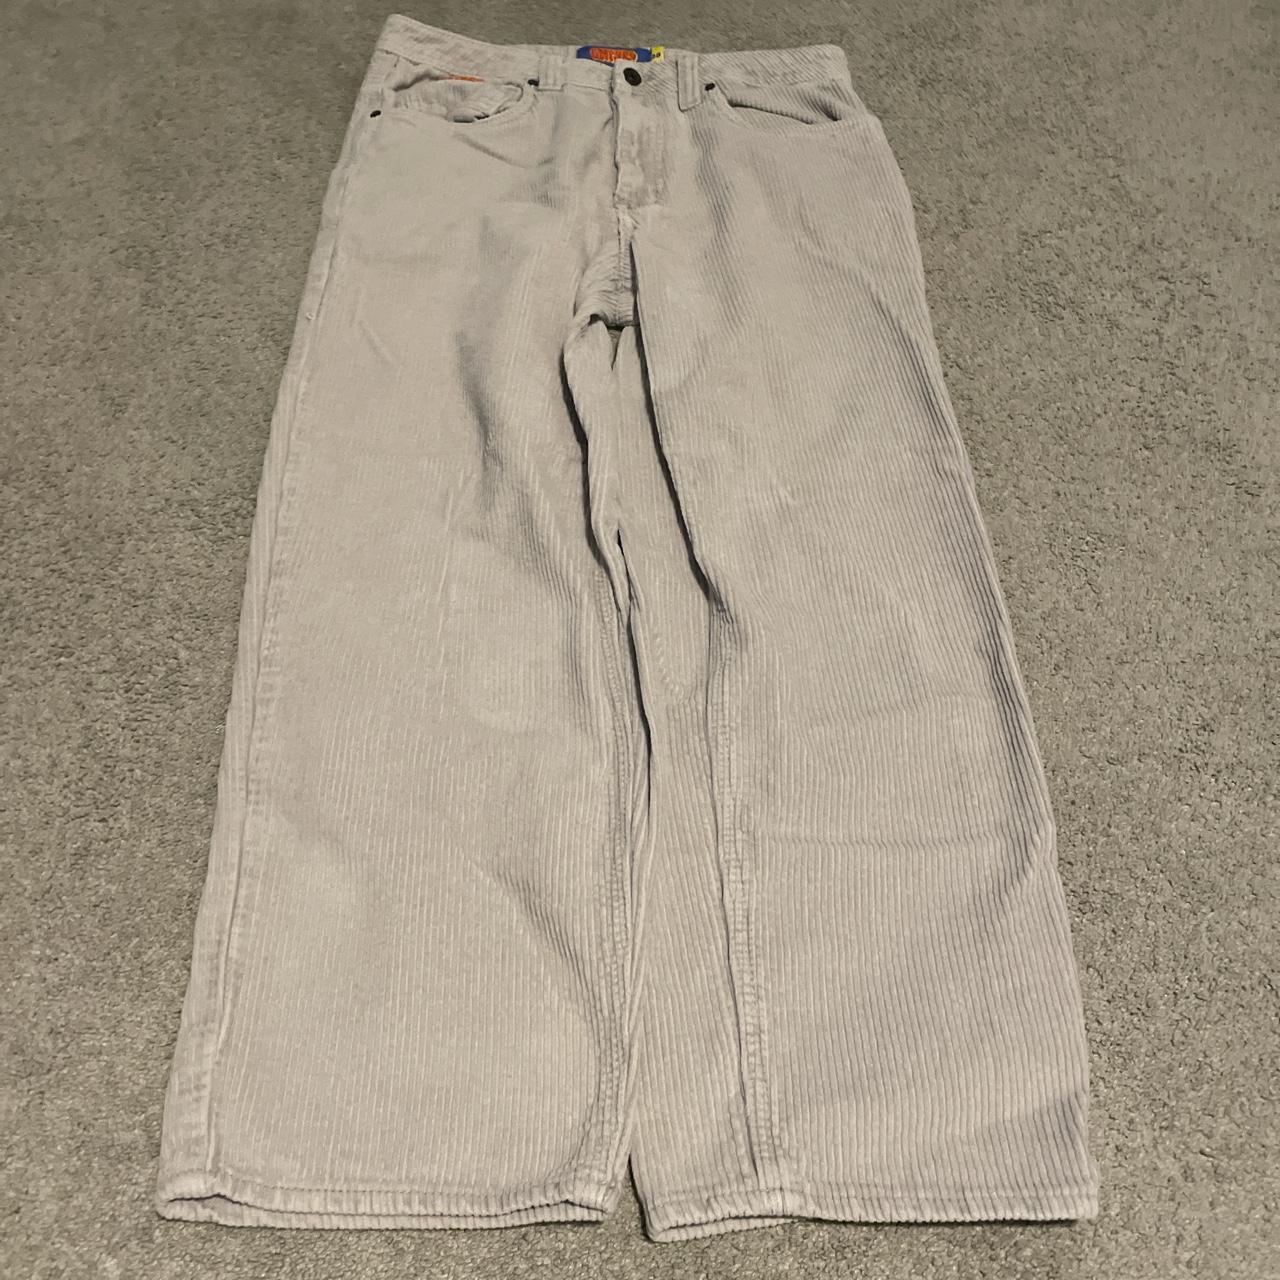 baggy gray/white empyre corduroys size 30 perfect... - Depop